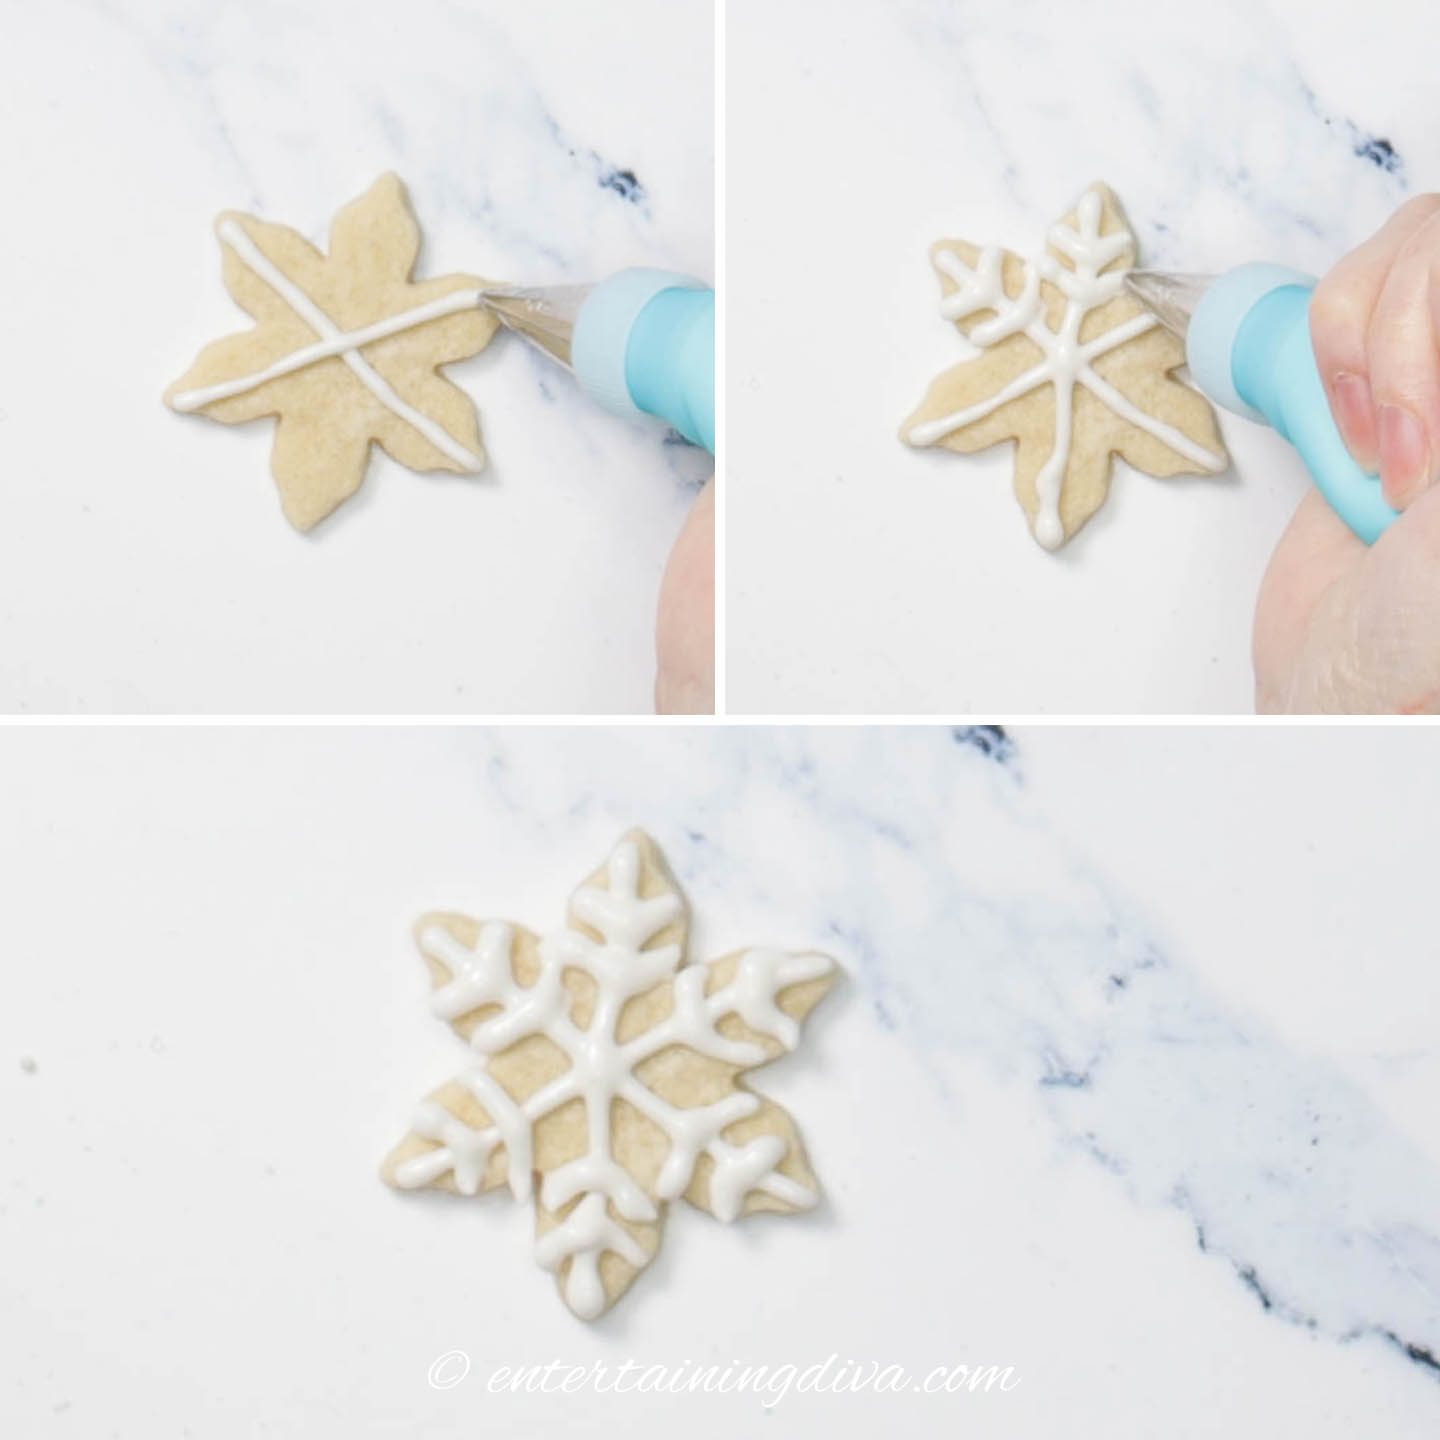 decorating snowflake cookies with white royal icing step-by-step